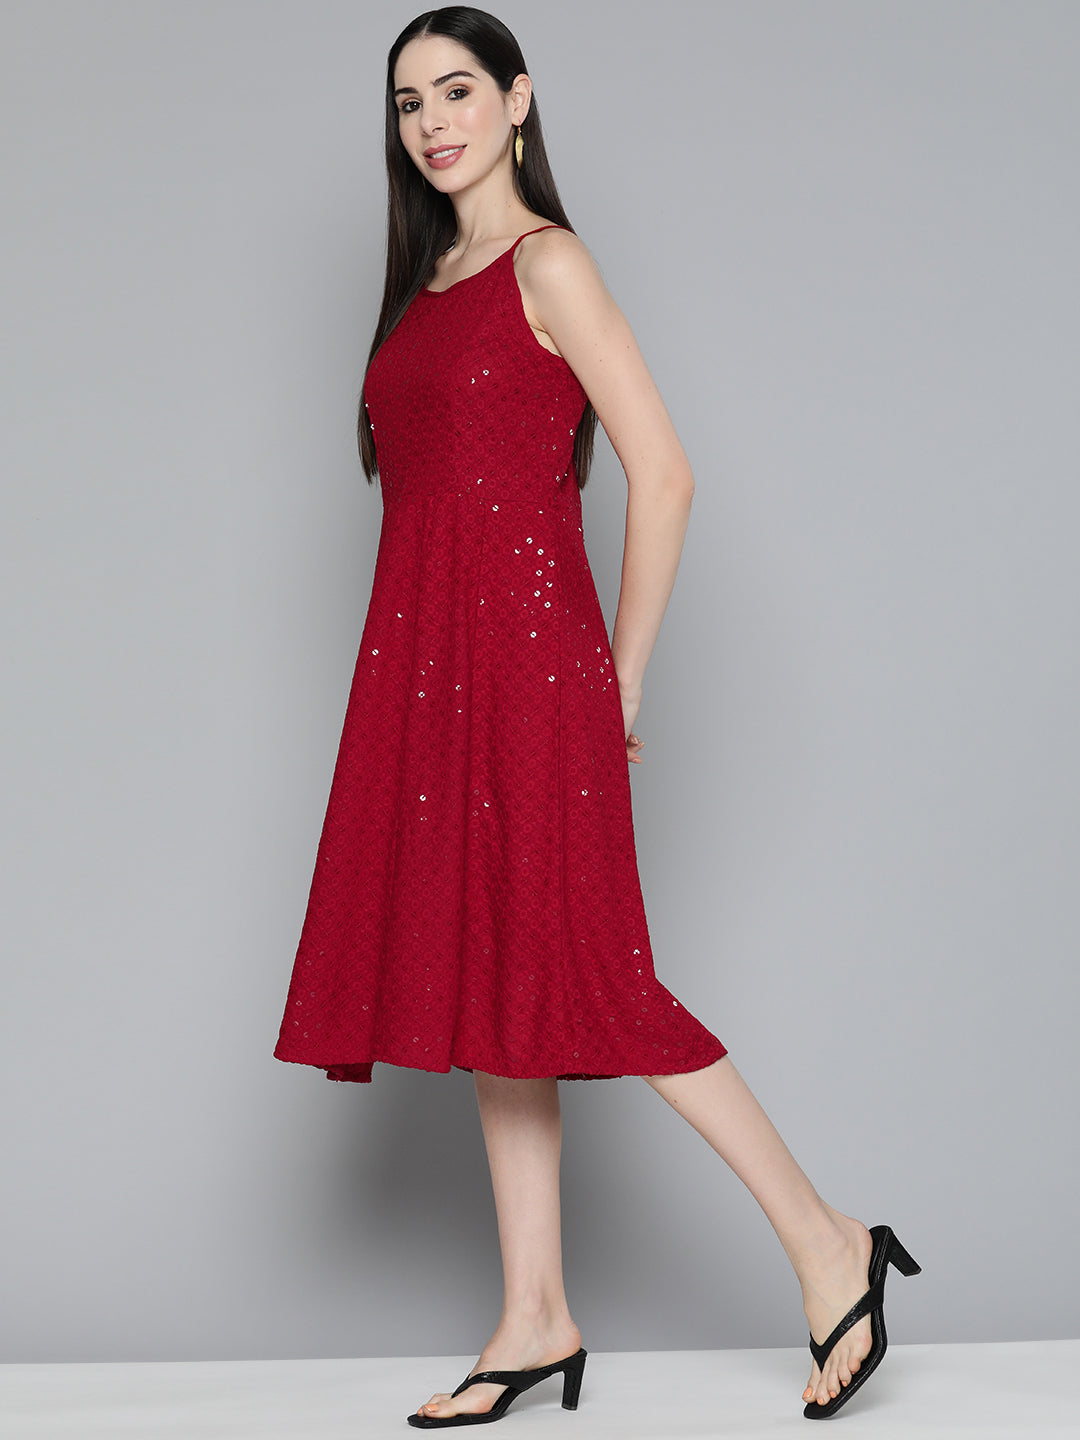 Jompers Maroon Floral Sequin Embroidered A-Line Midi Dress ( JOK 1494 Maroon )